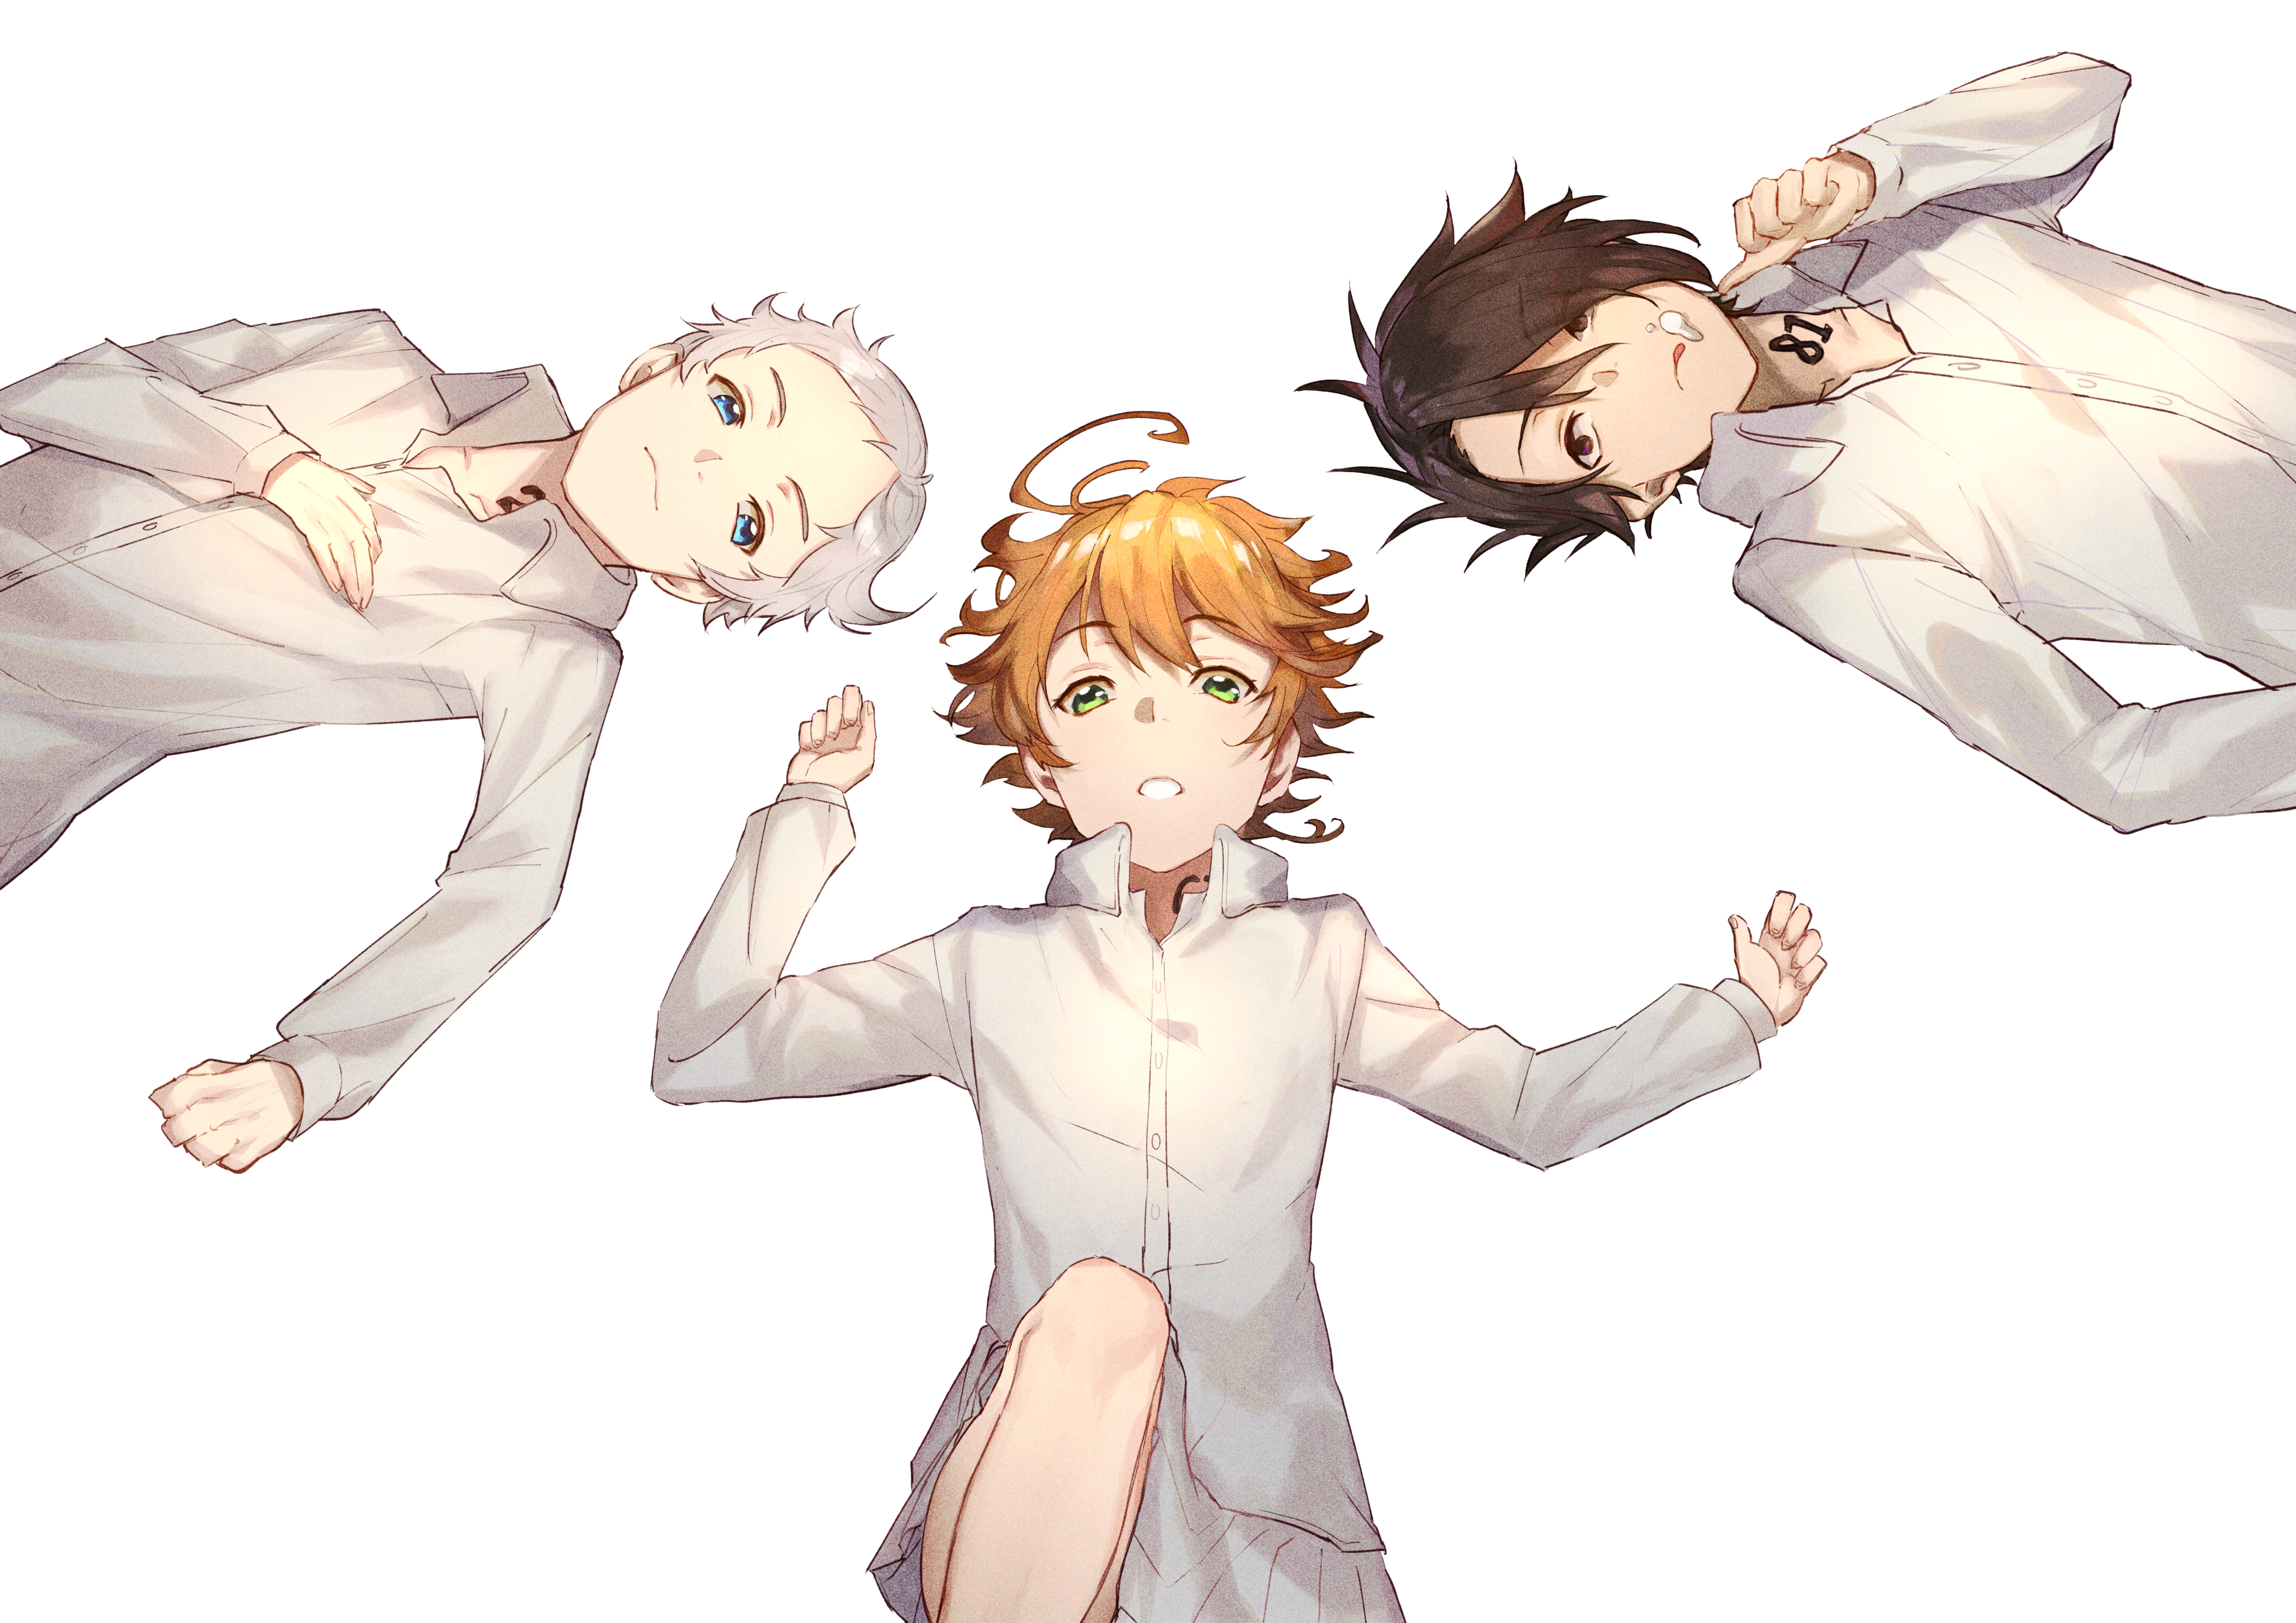 Emma The Promised Neverland Norman The Promised Neverland Ray The Promised Neverland 4082x2885